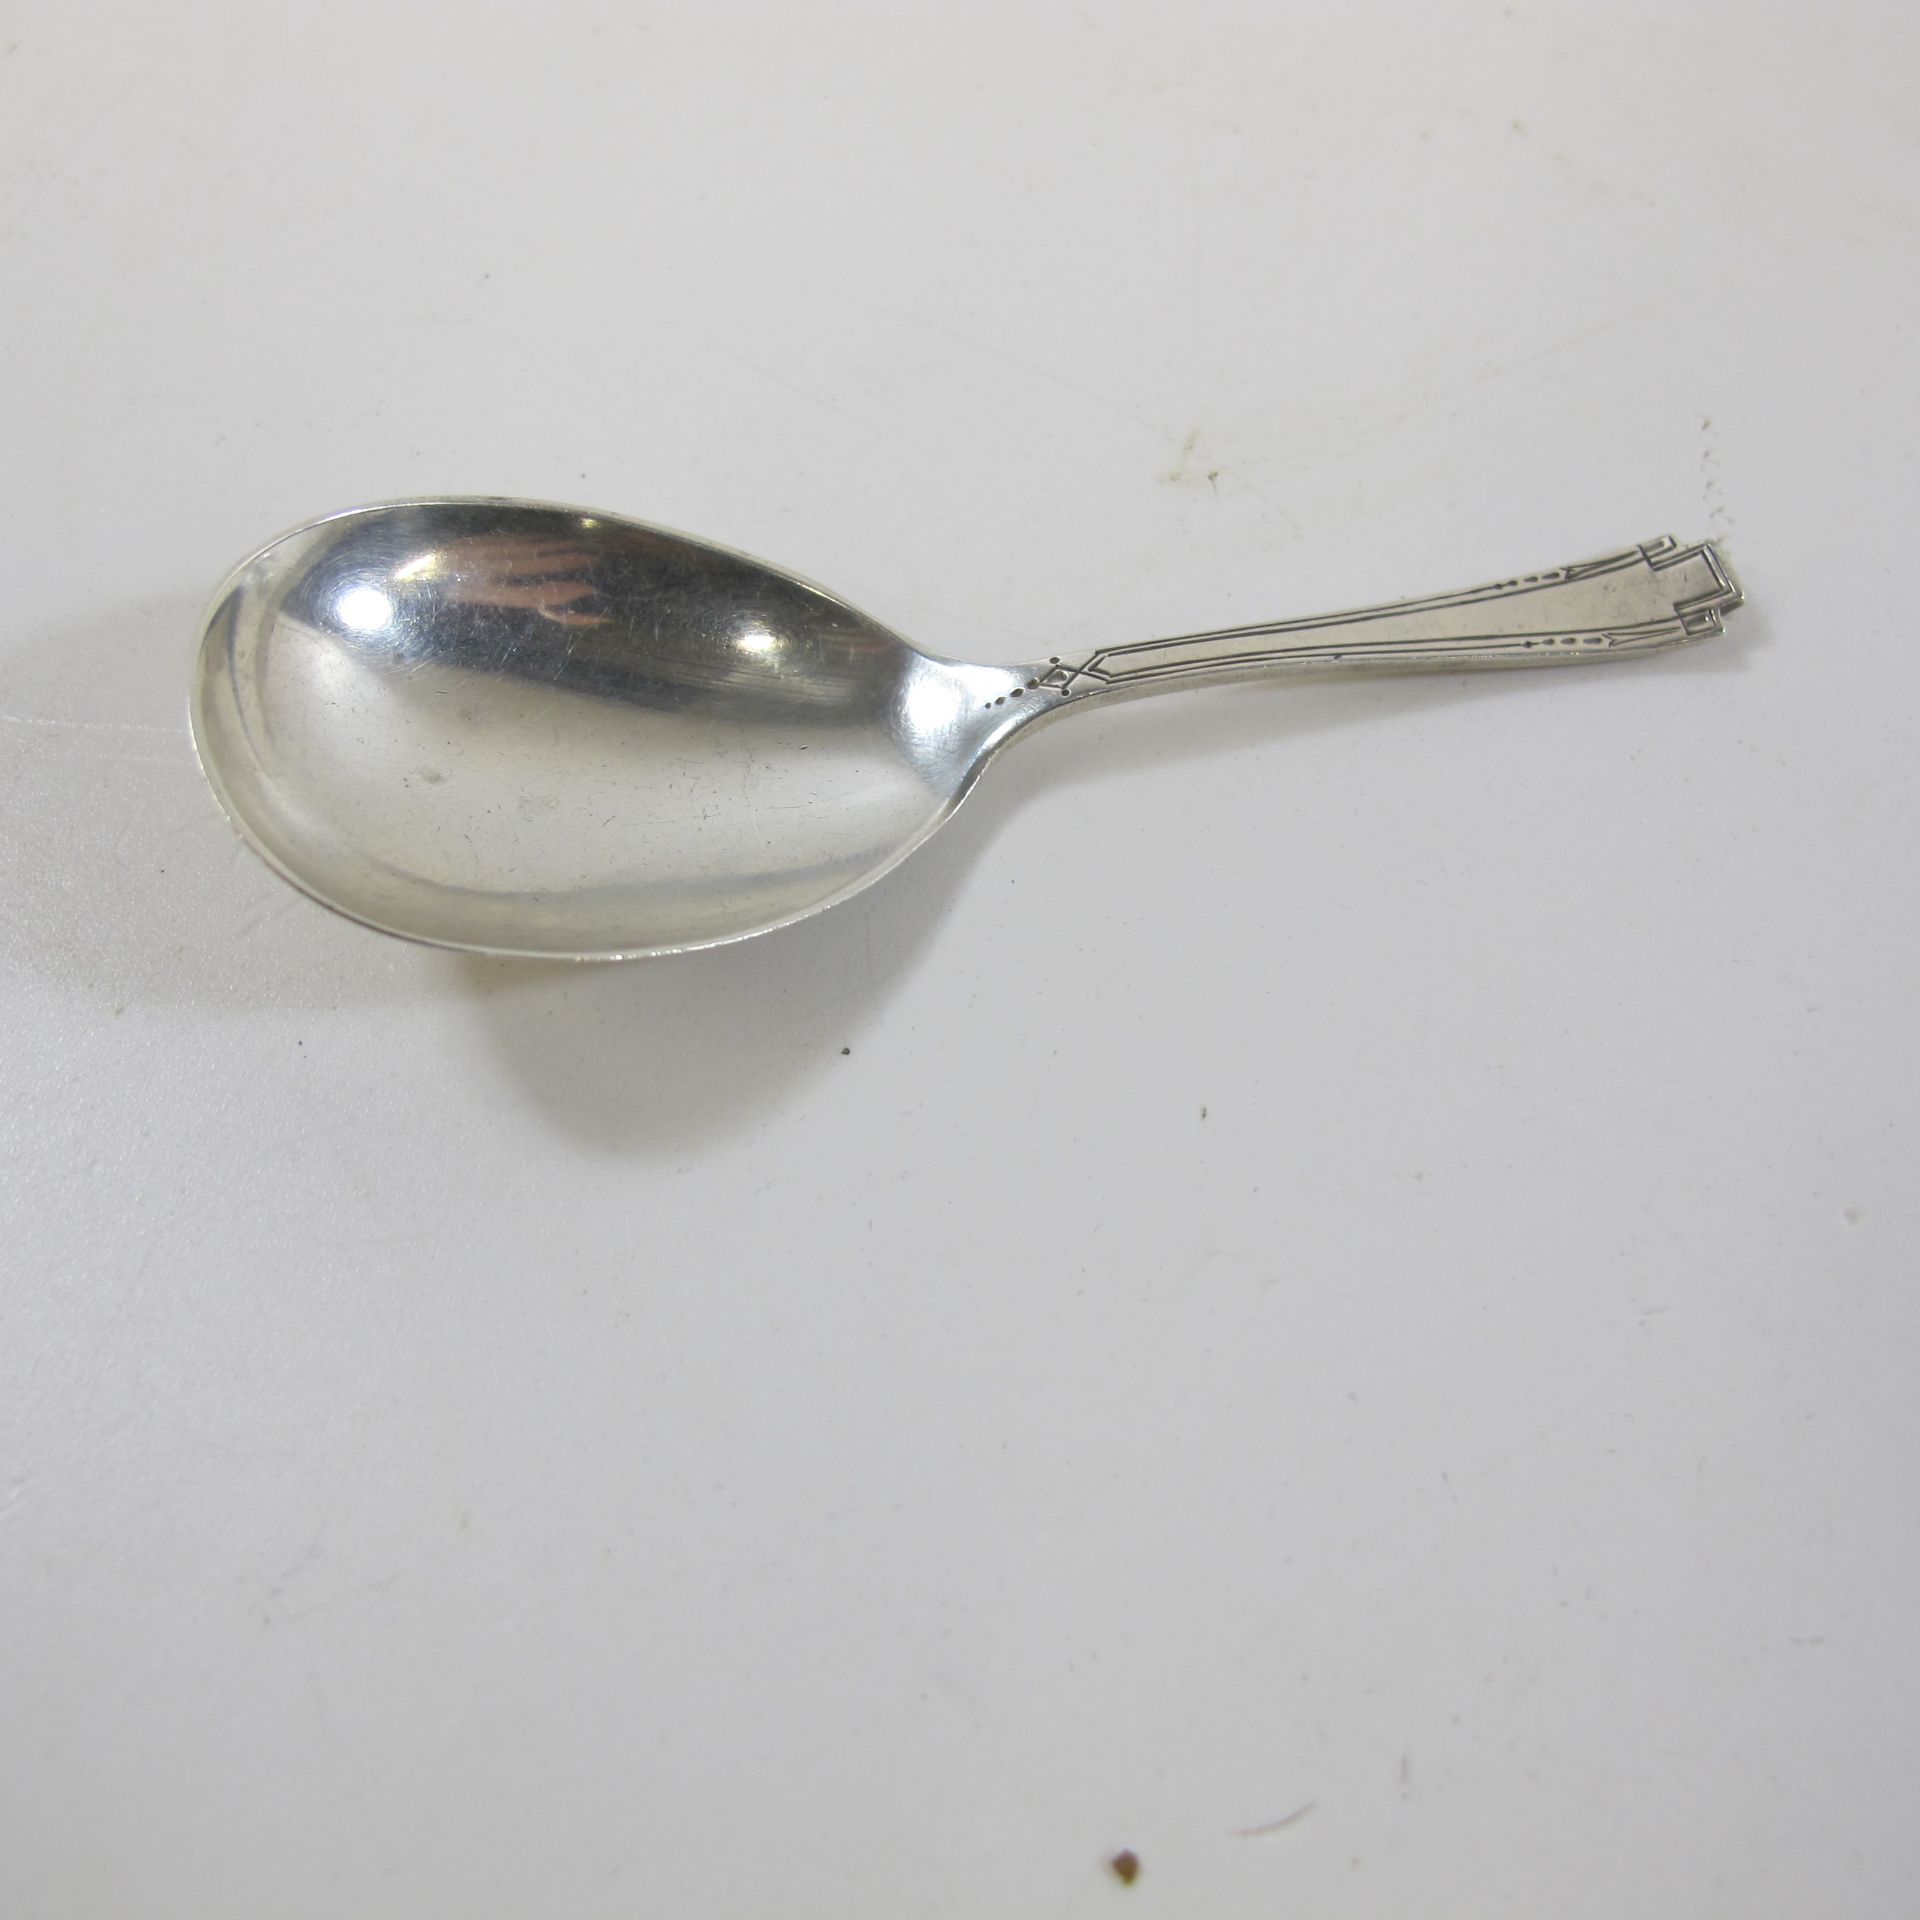 Art Deco Silver Caddy Spoon (Sheffield 1932) and 'Siam Sterling' Marked Menu Holder (est £25-£50) - Image 4 of 5